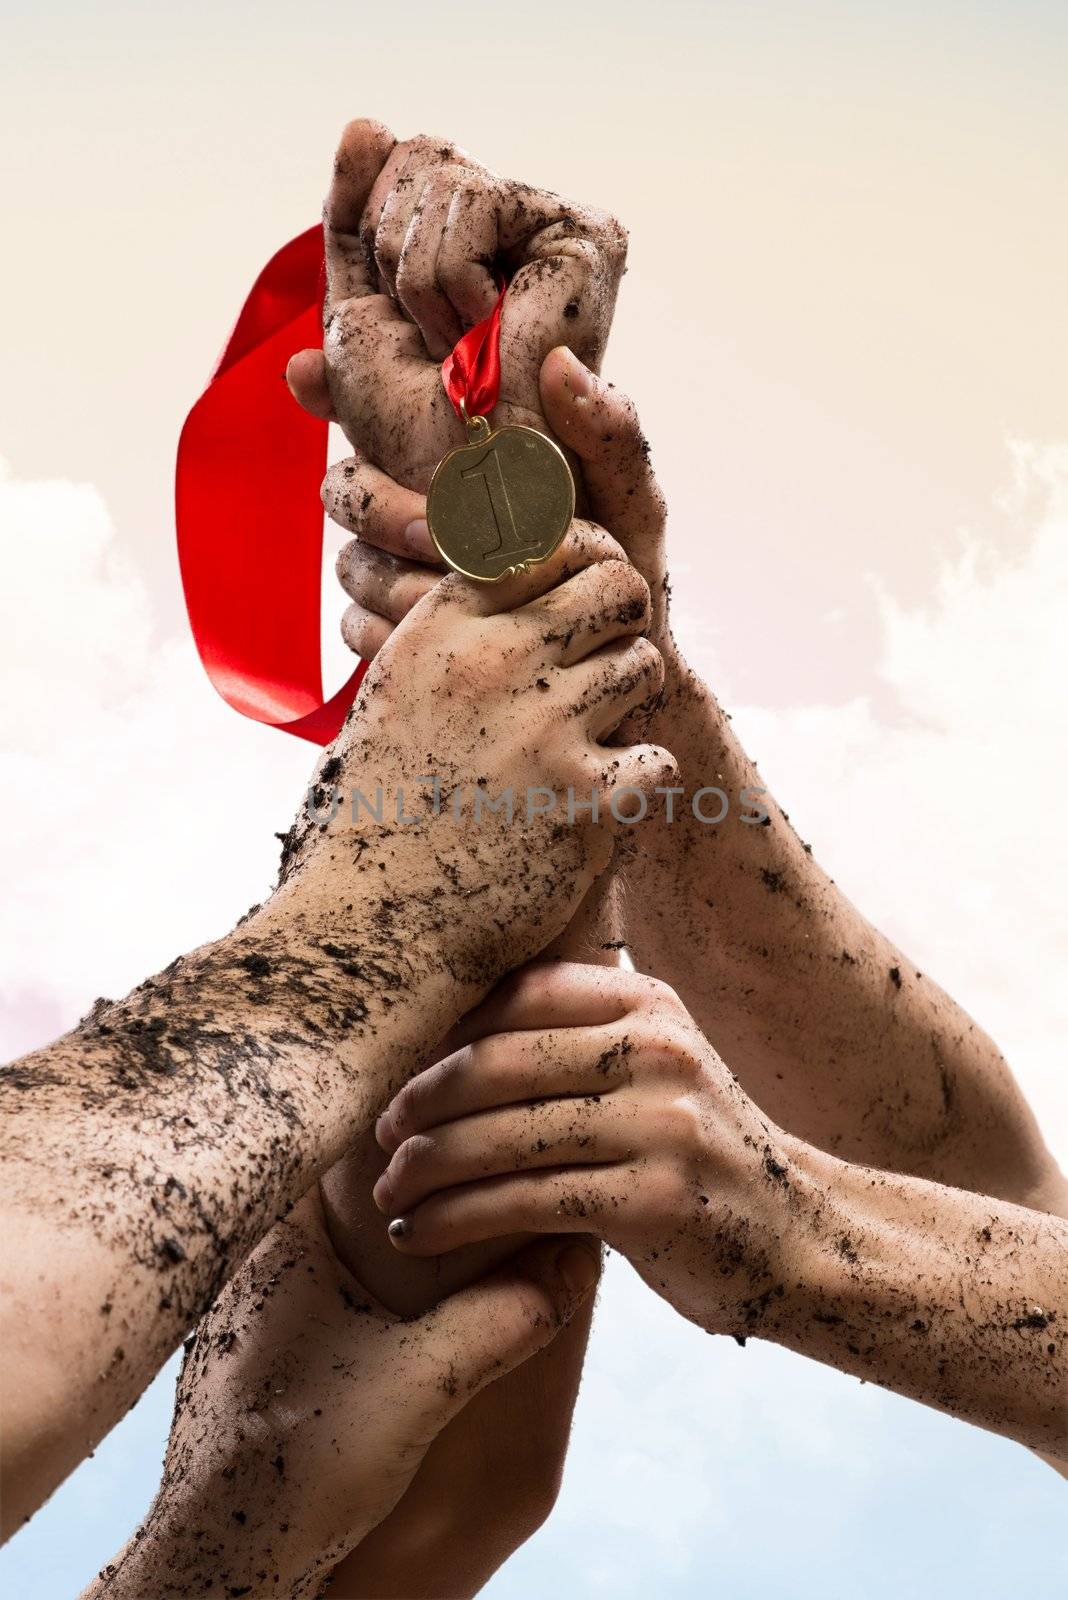 hands held together to win a medal, team work